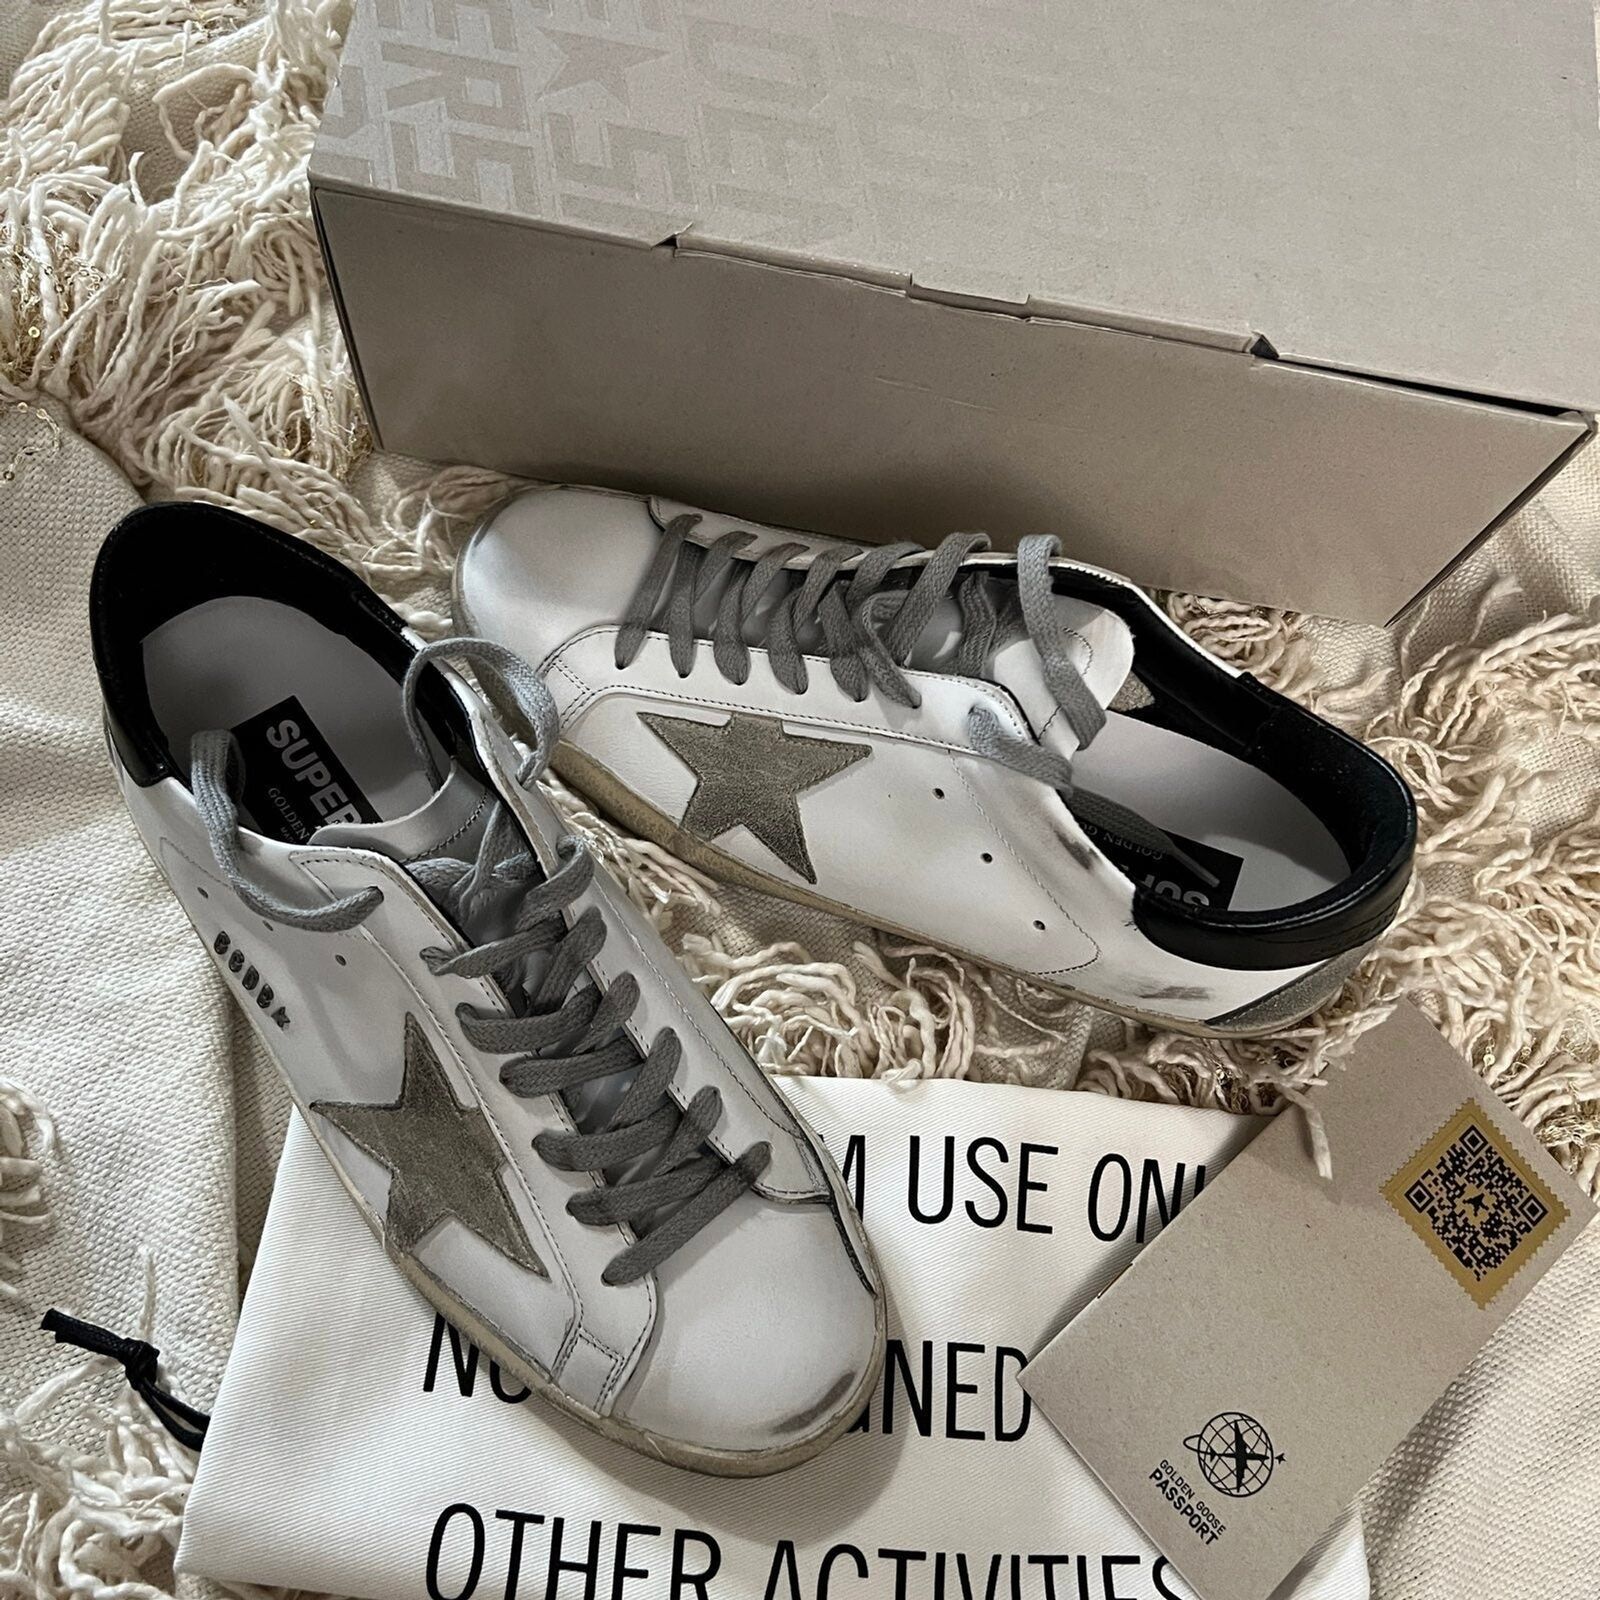 $600 For DIRTY Sneakers? Golden Goose Review, 46% OFF